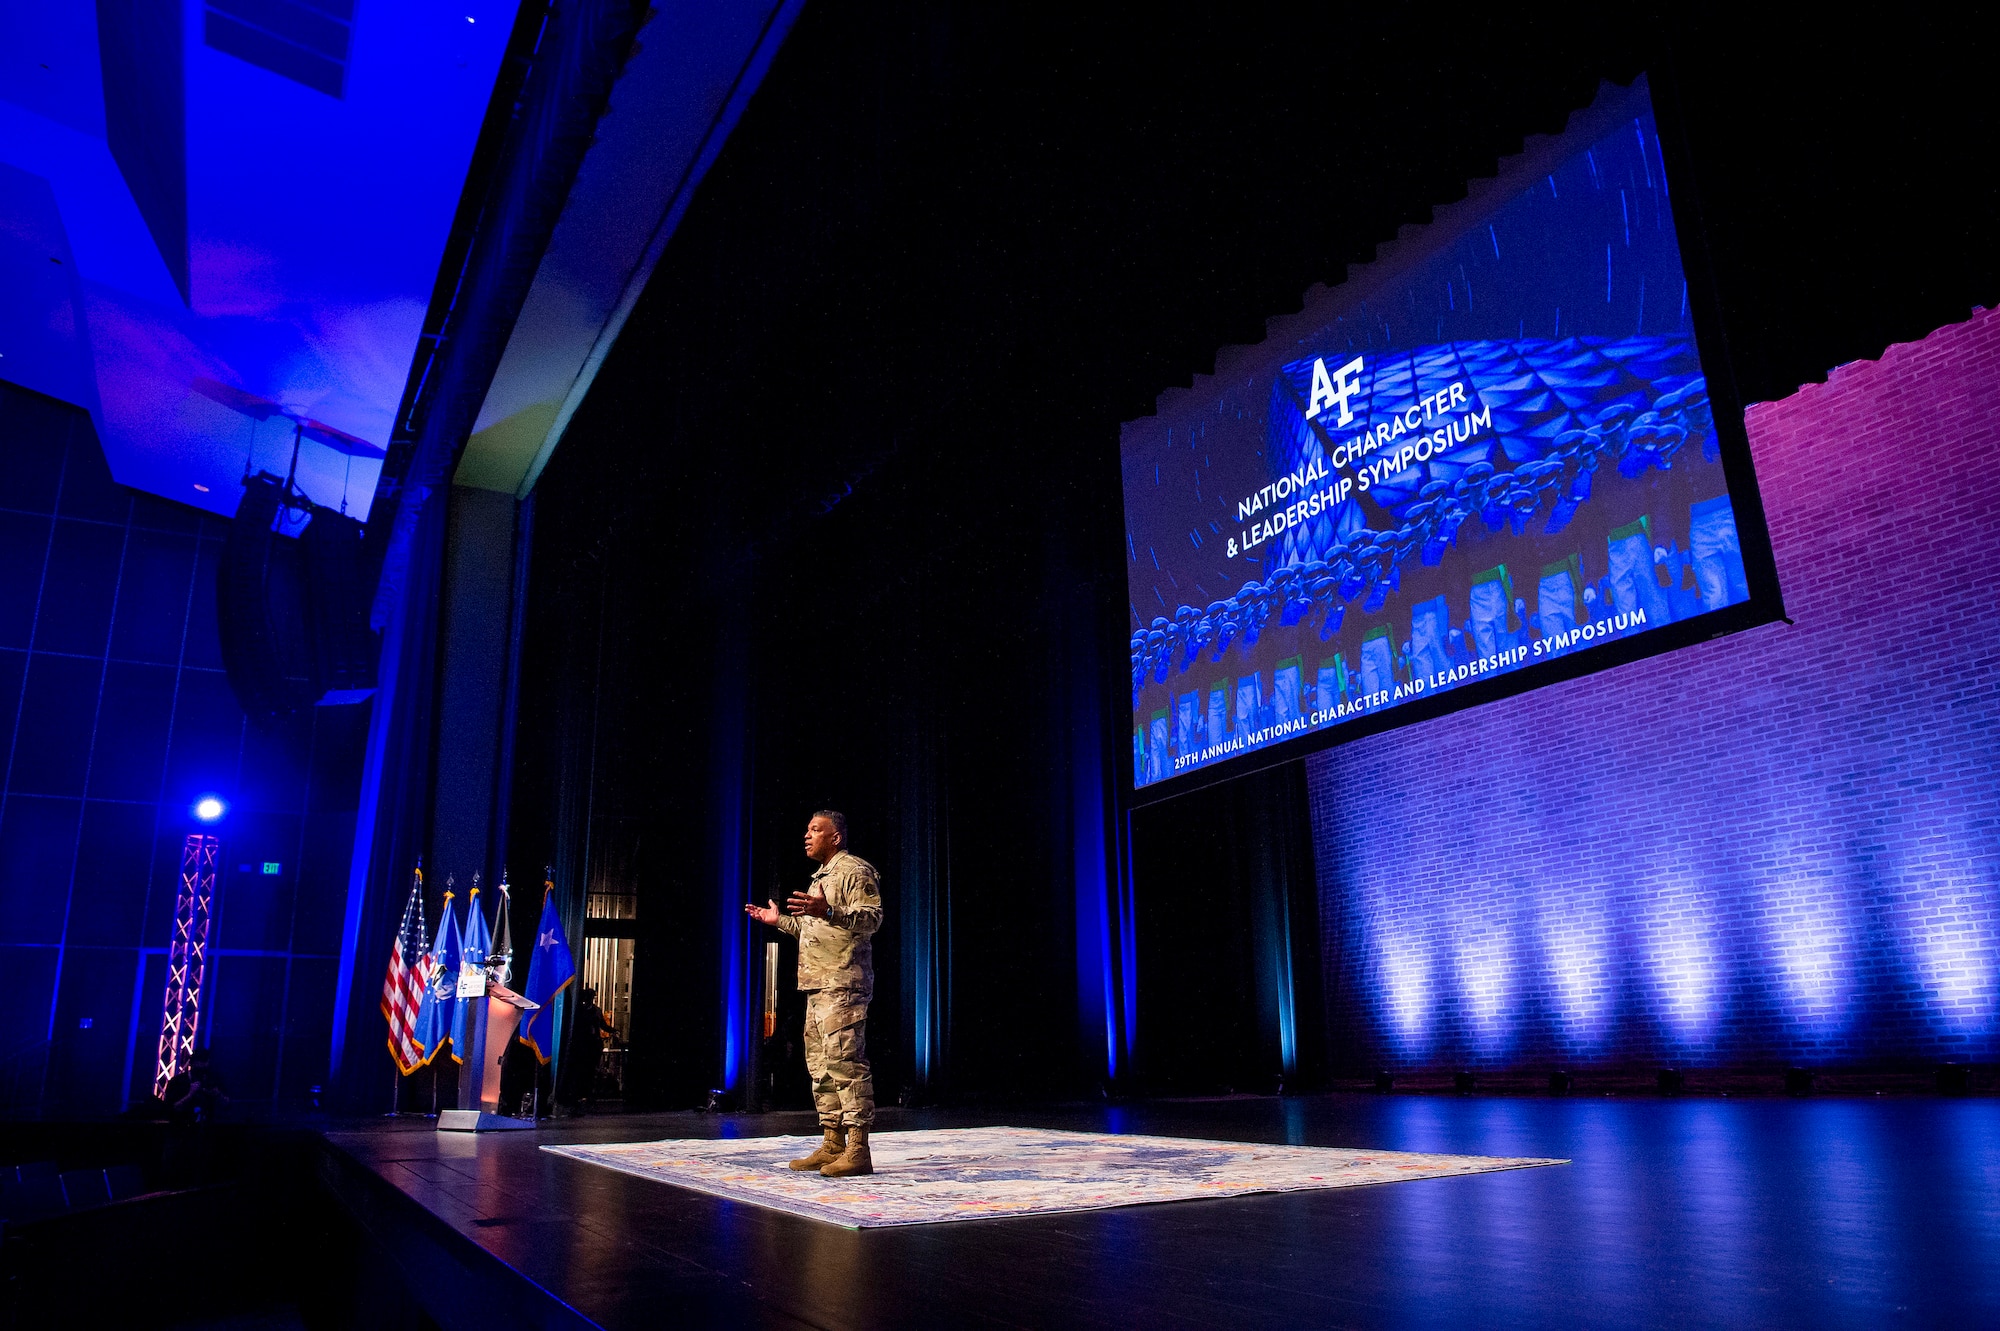 Superintendent of the U.S. Air Force Academy Lt. Gen. Richard Clark opens the 2022 National Character and Leadership Symposium with comments on the importance of ethics and respect for all to an audience of cadets, service members and staff in Arnold Hall Theater, Colorado Springs, Colo., Feb. 24, 2022. (U.S. Air Force photo by Joshua Armstrong)